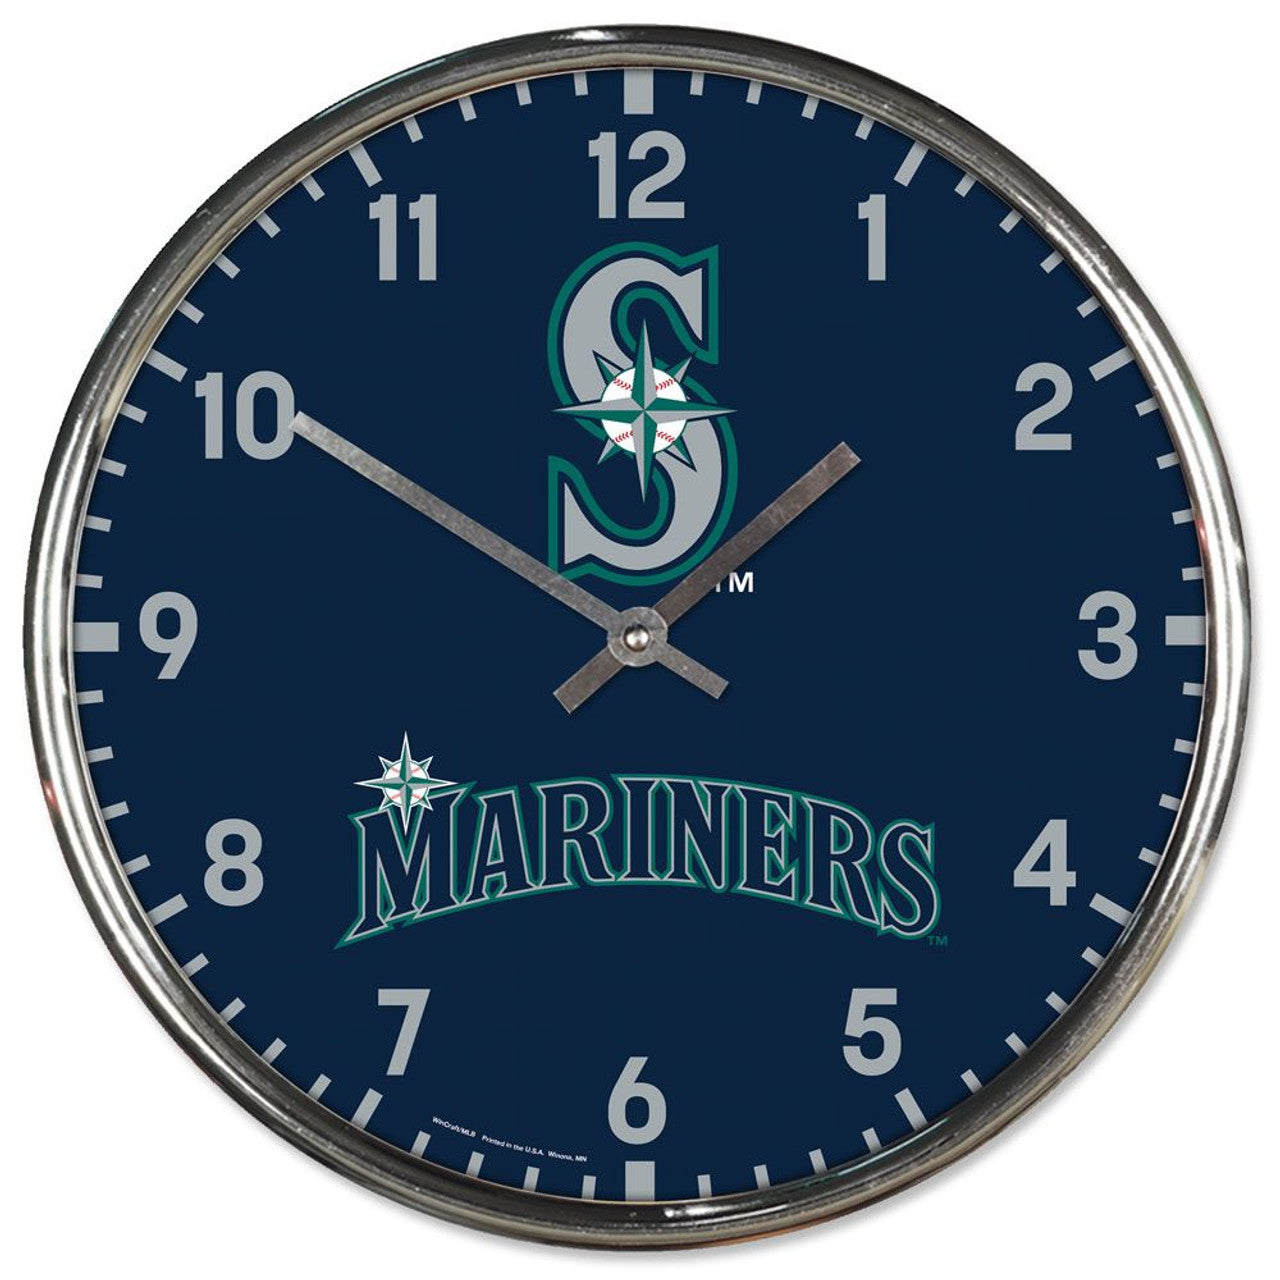 Seattle Mariners 12" Round Chrome Wall Clock by Wincraft